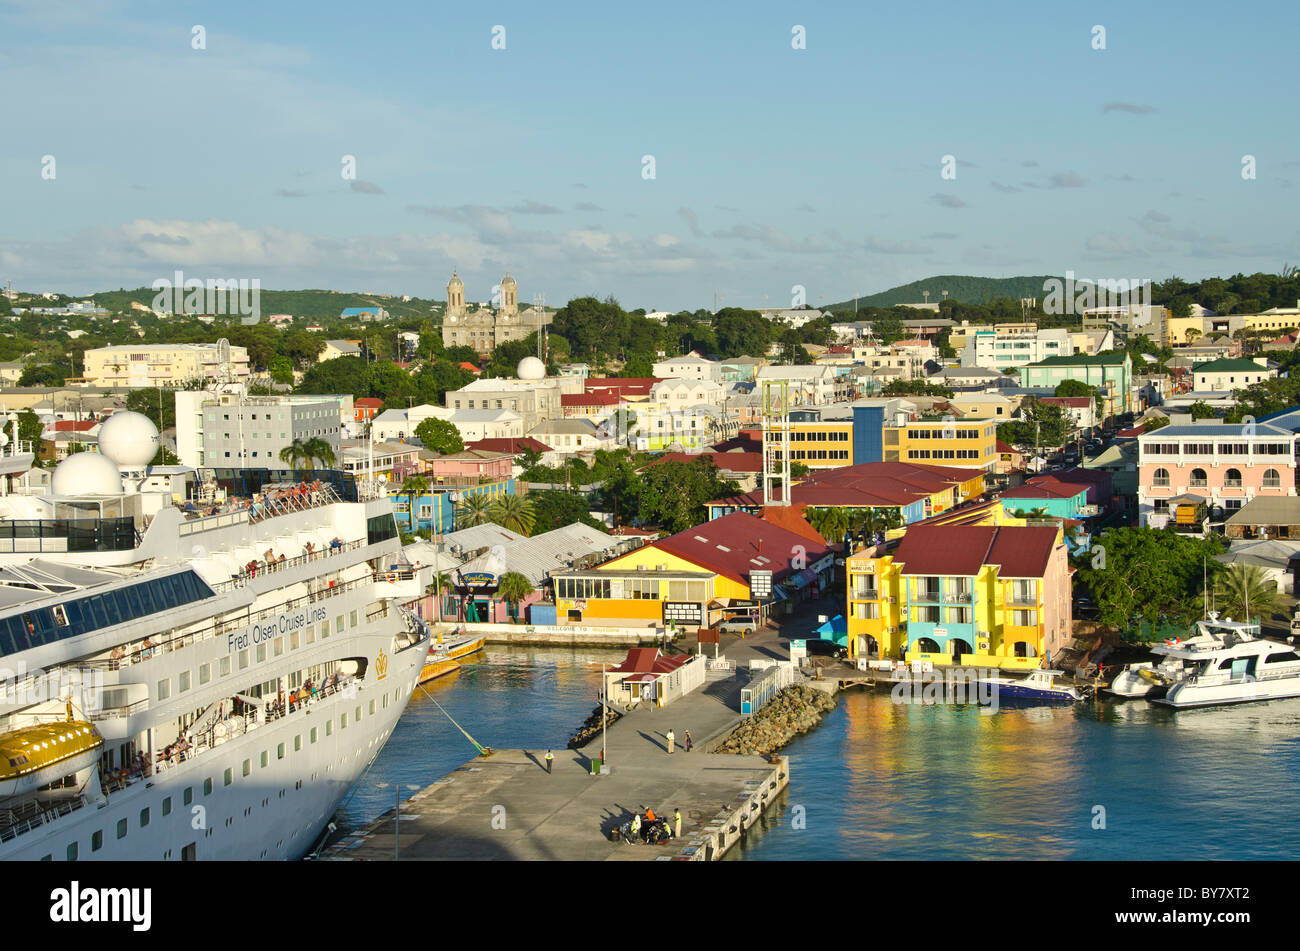 Antigua St. Johns cruise port dock with moored ship and cityscape in bright colors from Caribbean cruise ship Stock Photo